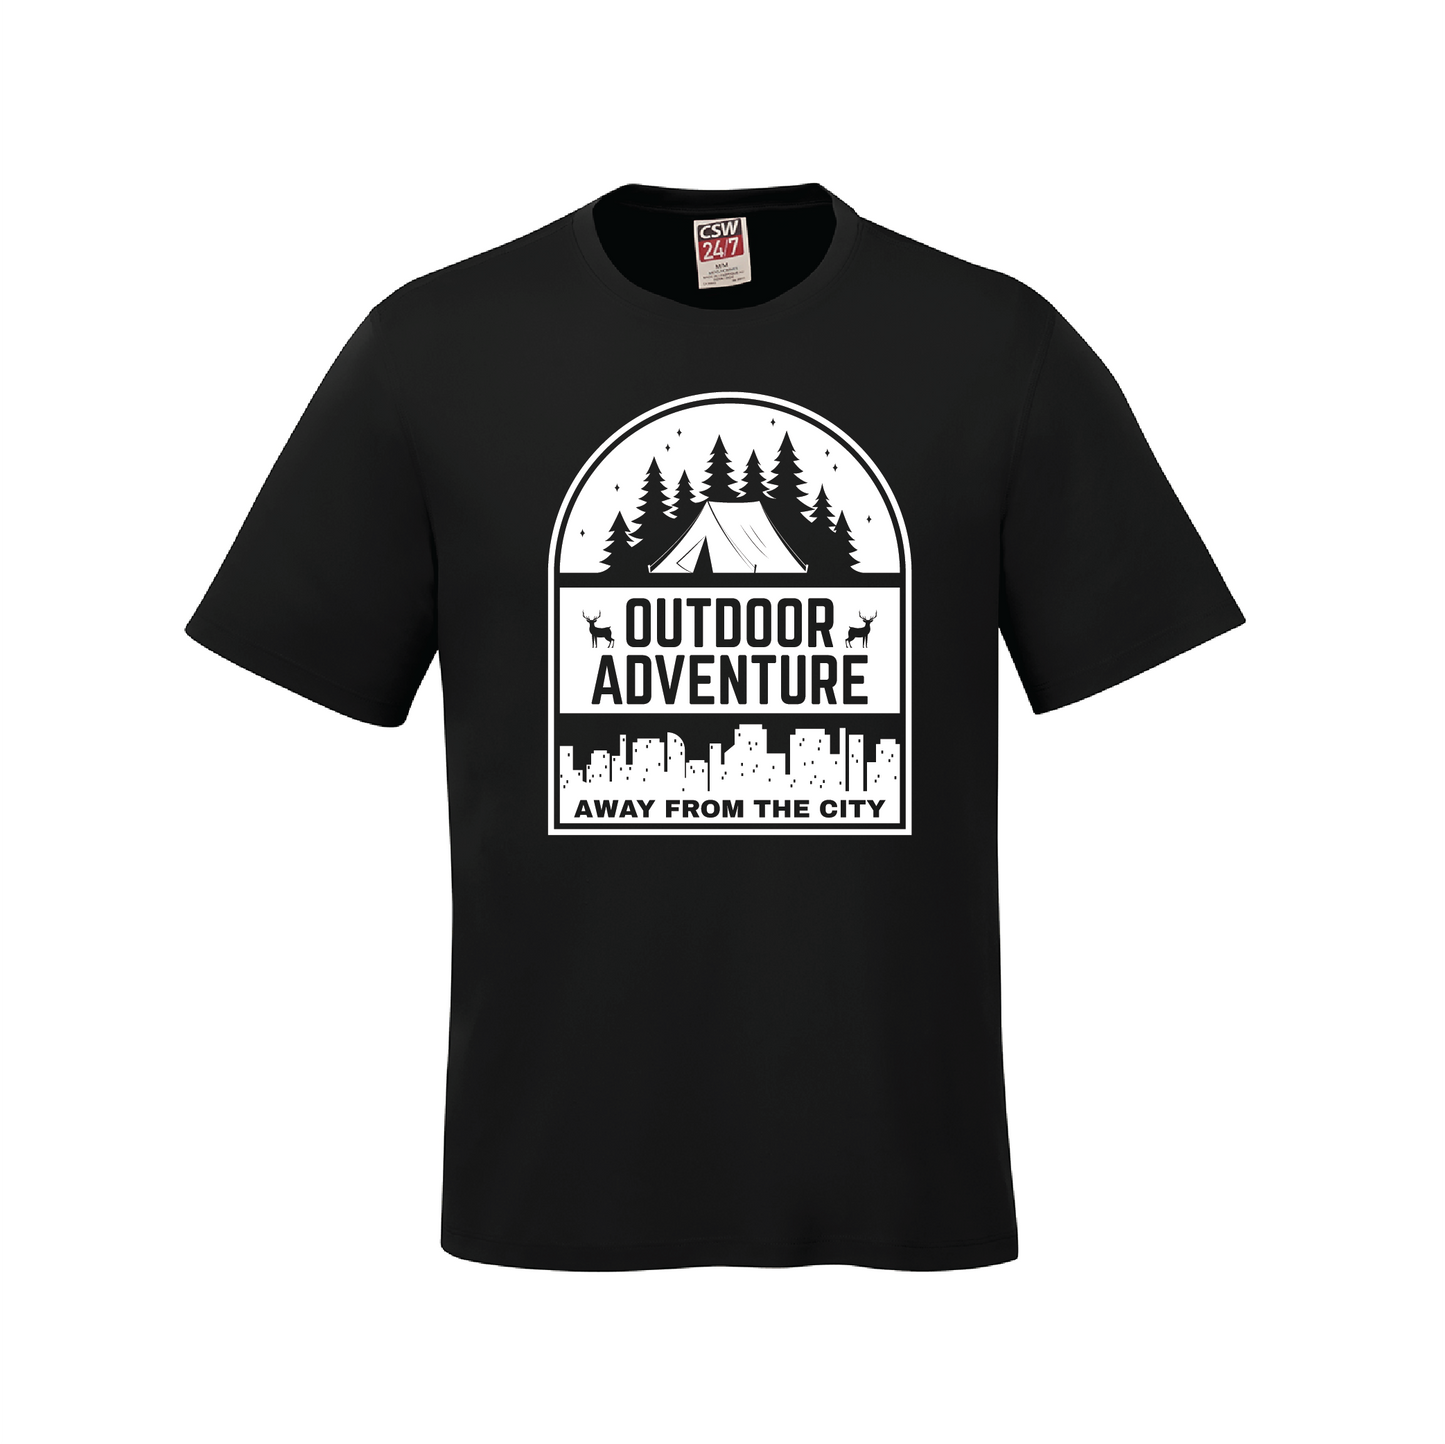 Outdoor Adventure Away From The City T-Shirt